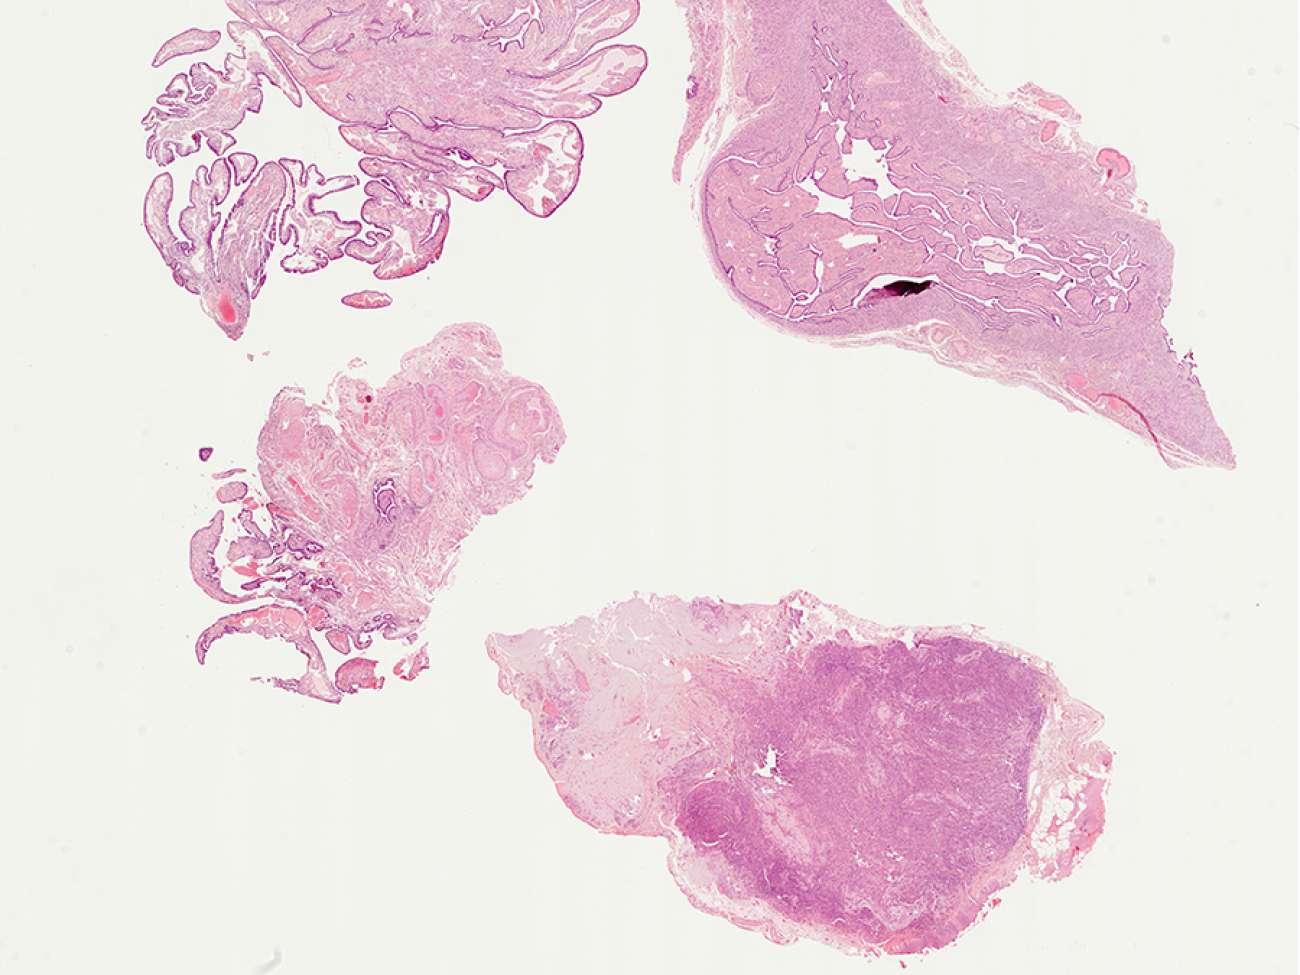 An example of a digital biopsy slide that may be used in this research study. Photo courtesy of Huron Digital Pathology